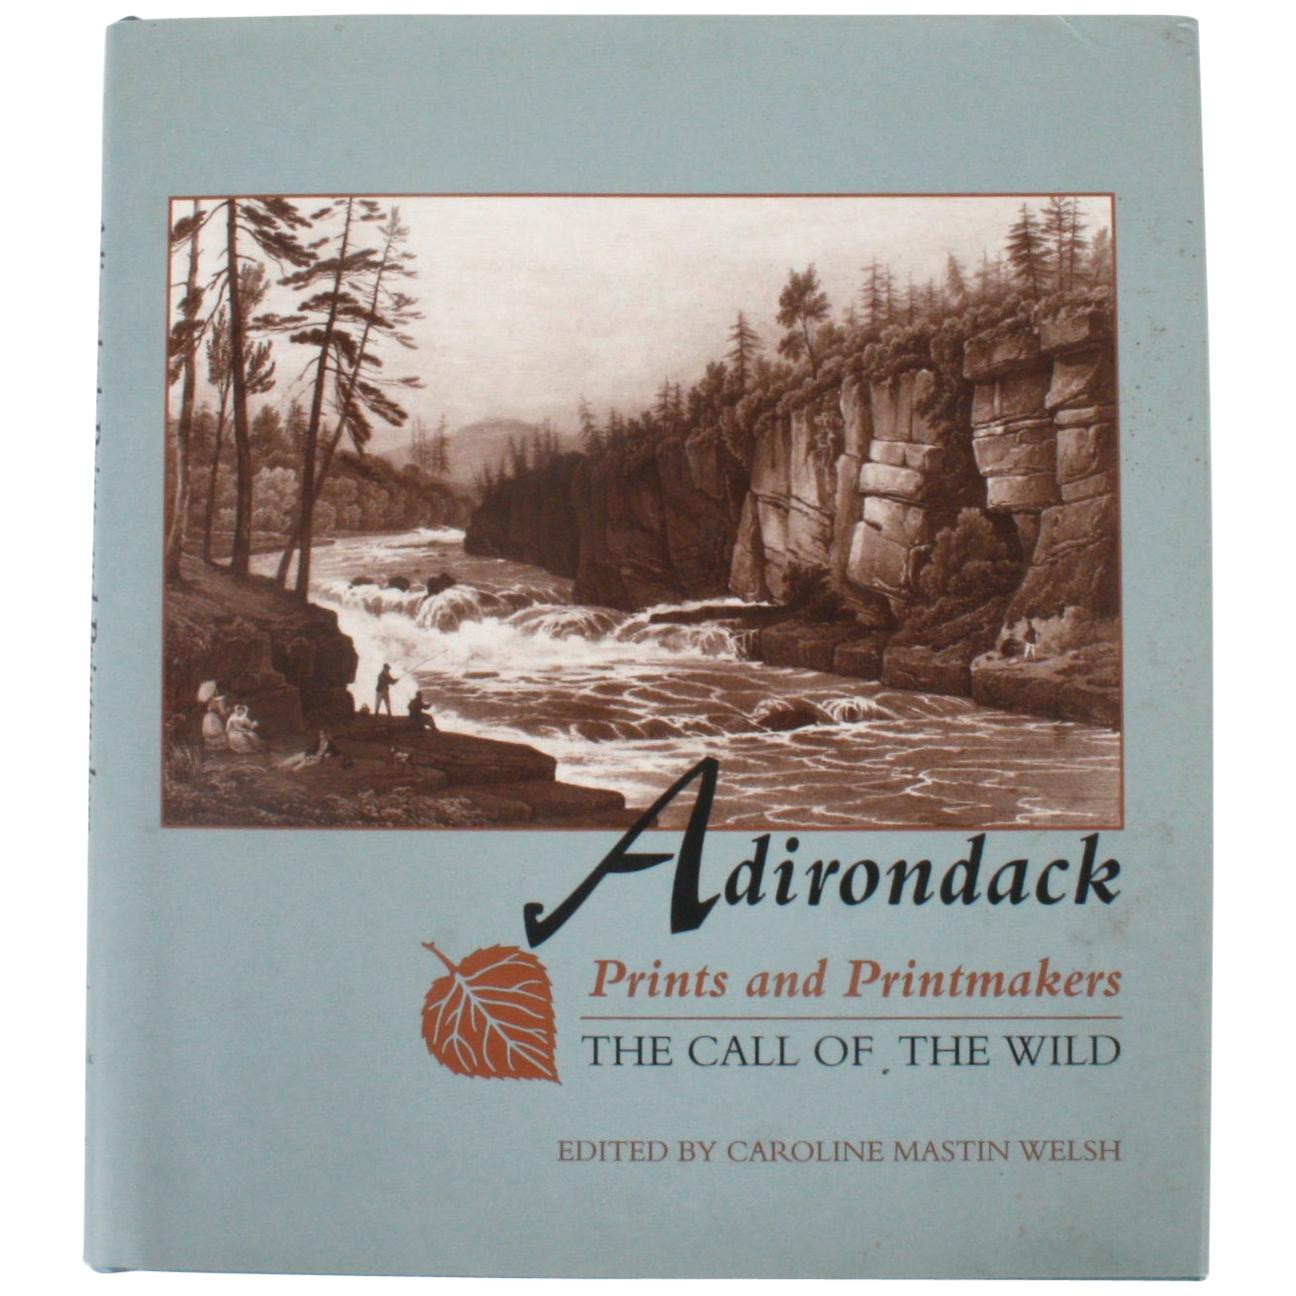 Adirondack Prints and Printmakers, The Call of the Wild, 1st Edition